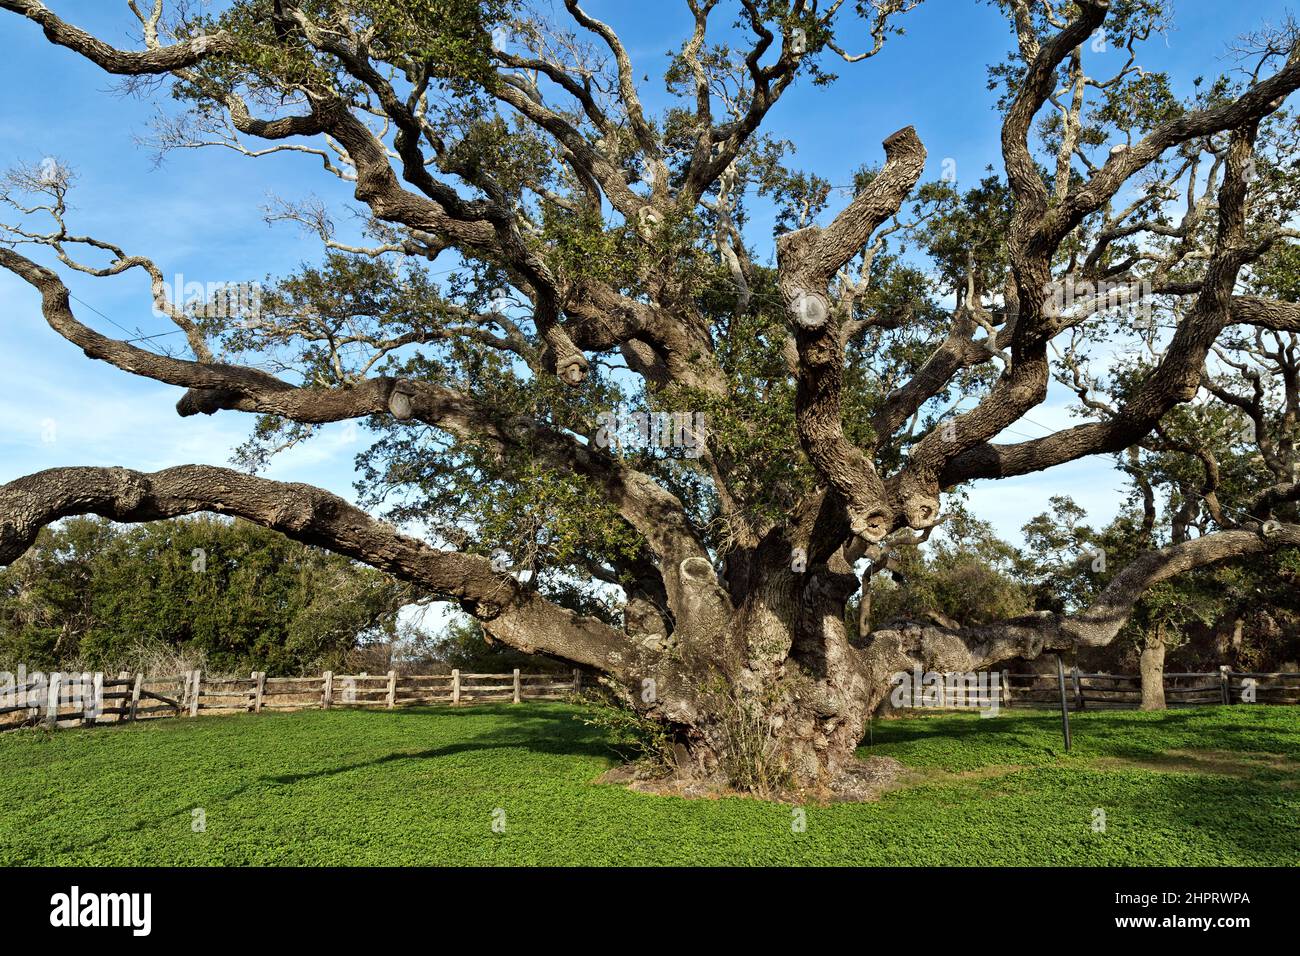 The Big Tree 'Quercus virginiana', Southern Live Oak, in excess of 1000 years old. Stock Photo